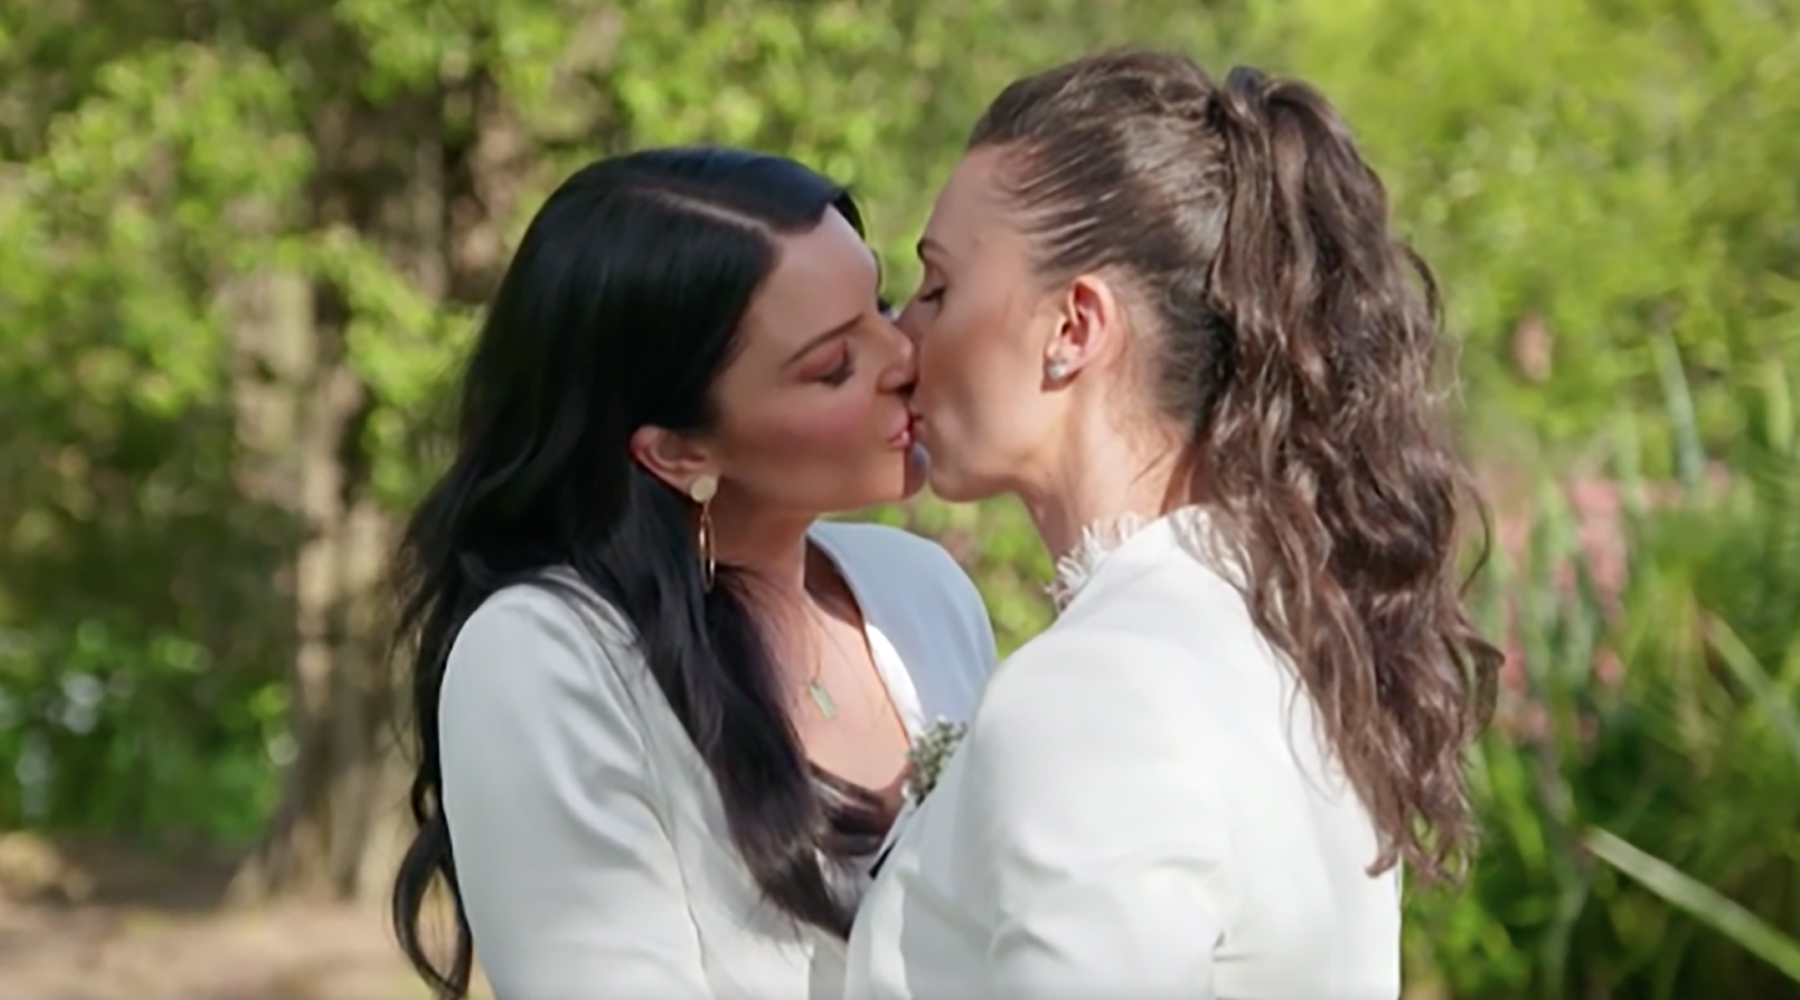 Married at first sight uk lesbian couple